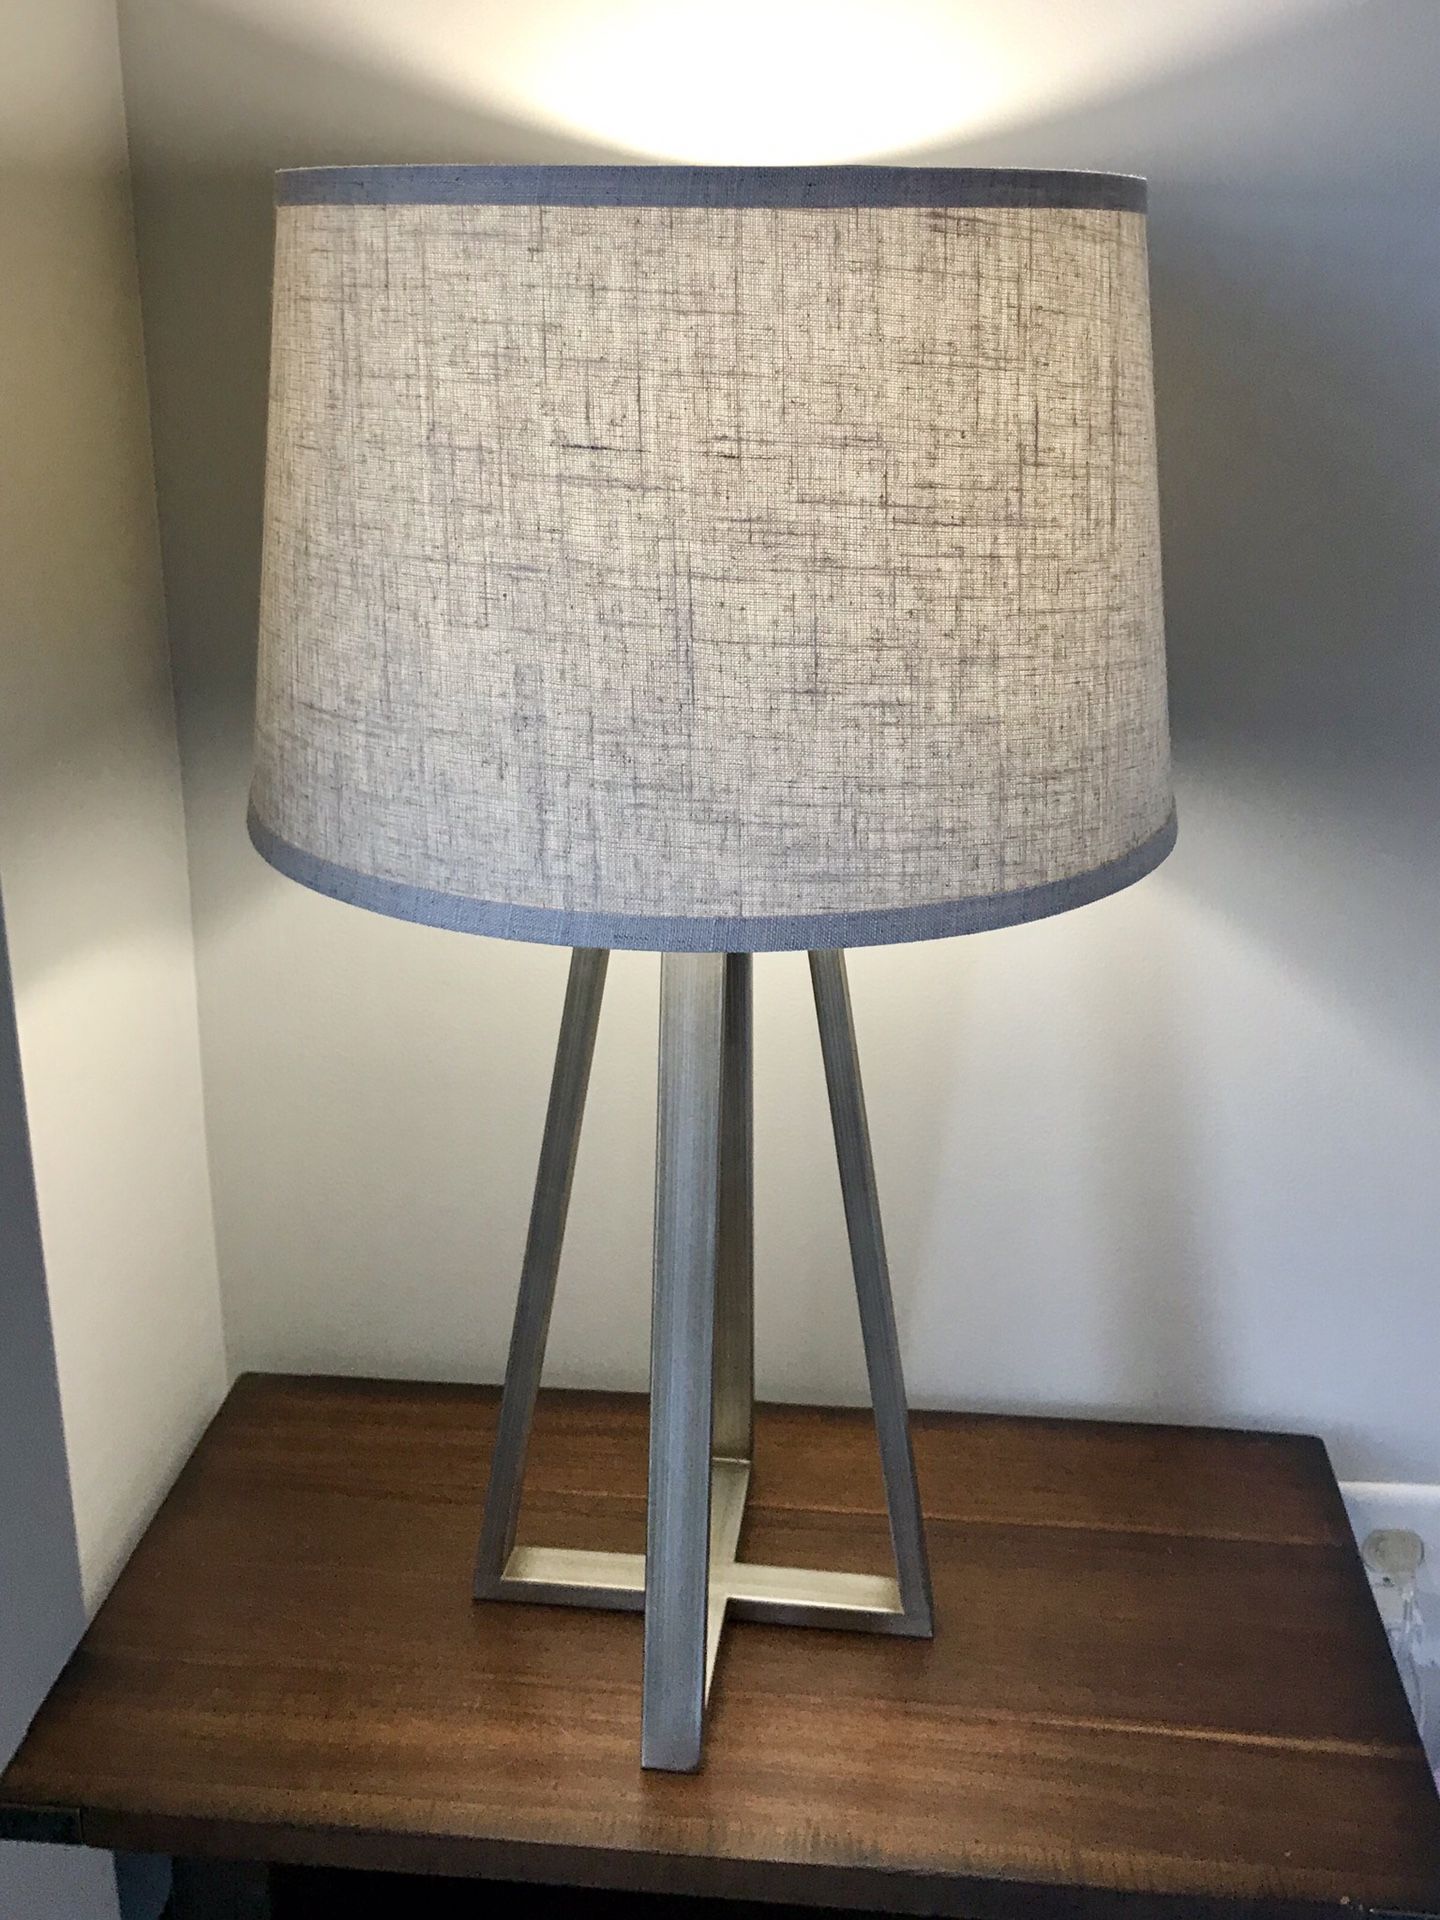 Beautiful table lamp from Target’s Threshold Series